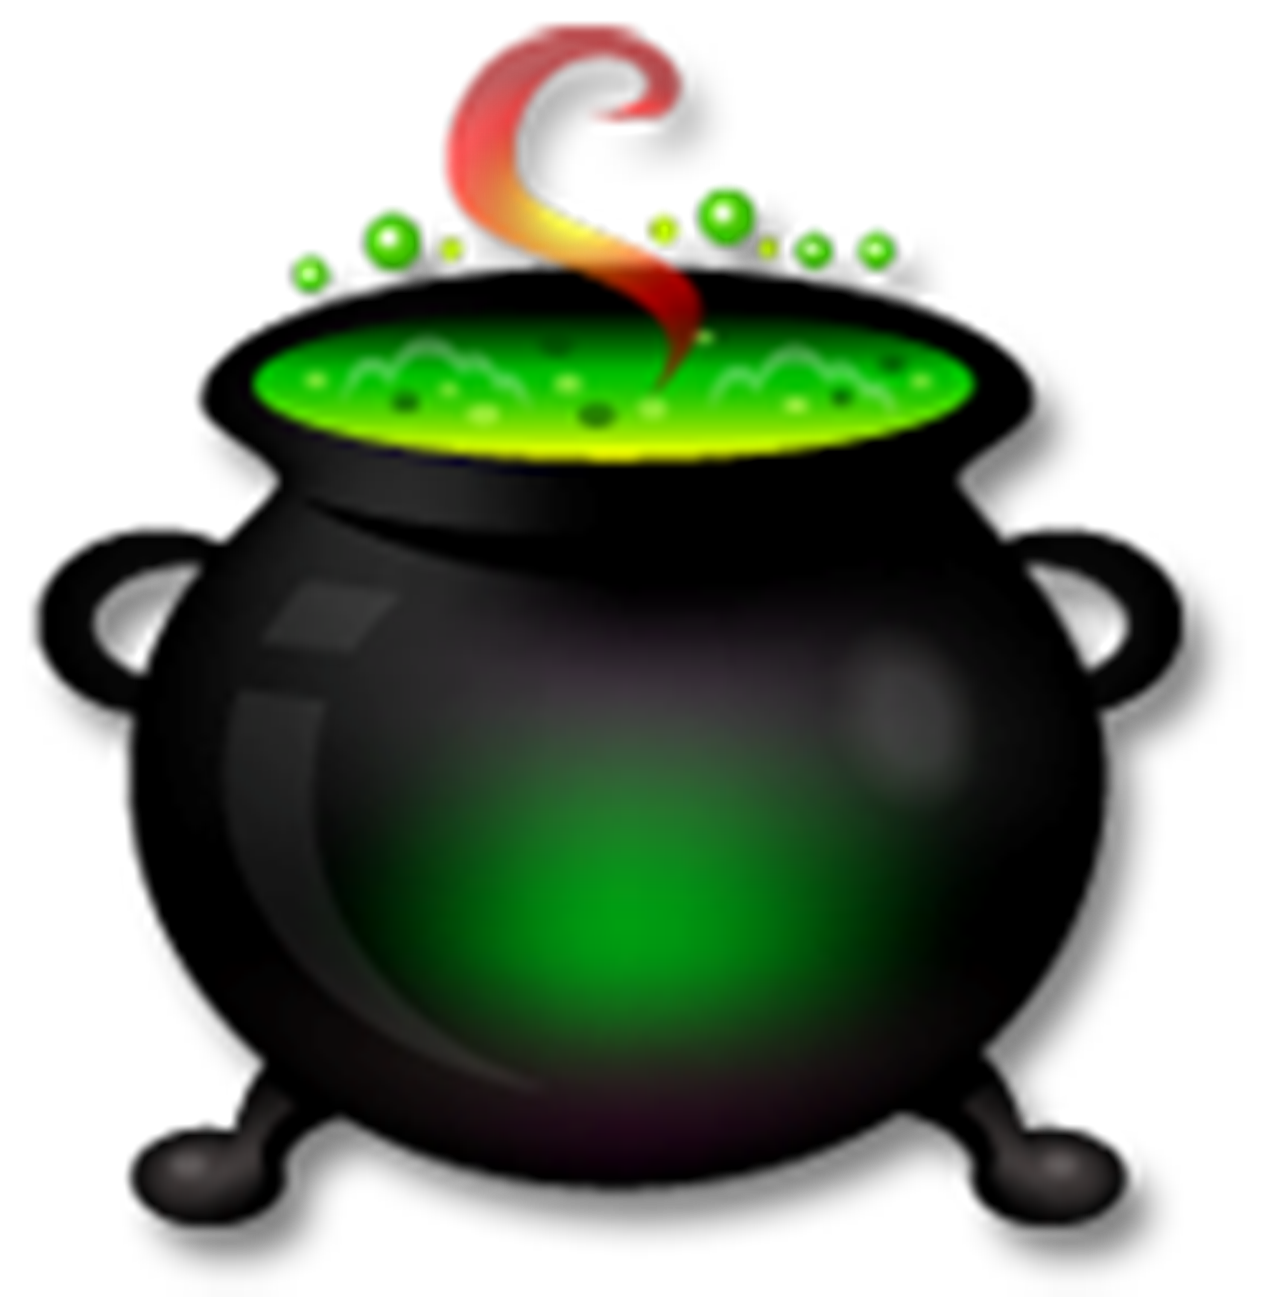 19 Cauldron Picture Free Cliparts That You Can Download To You